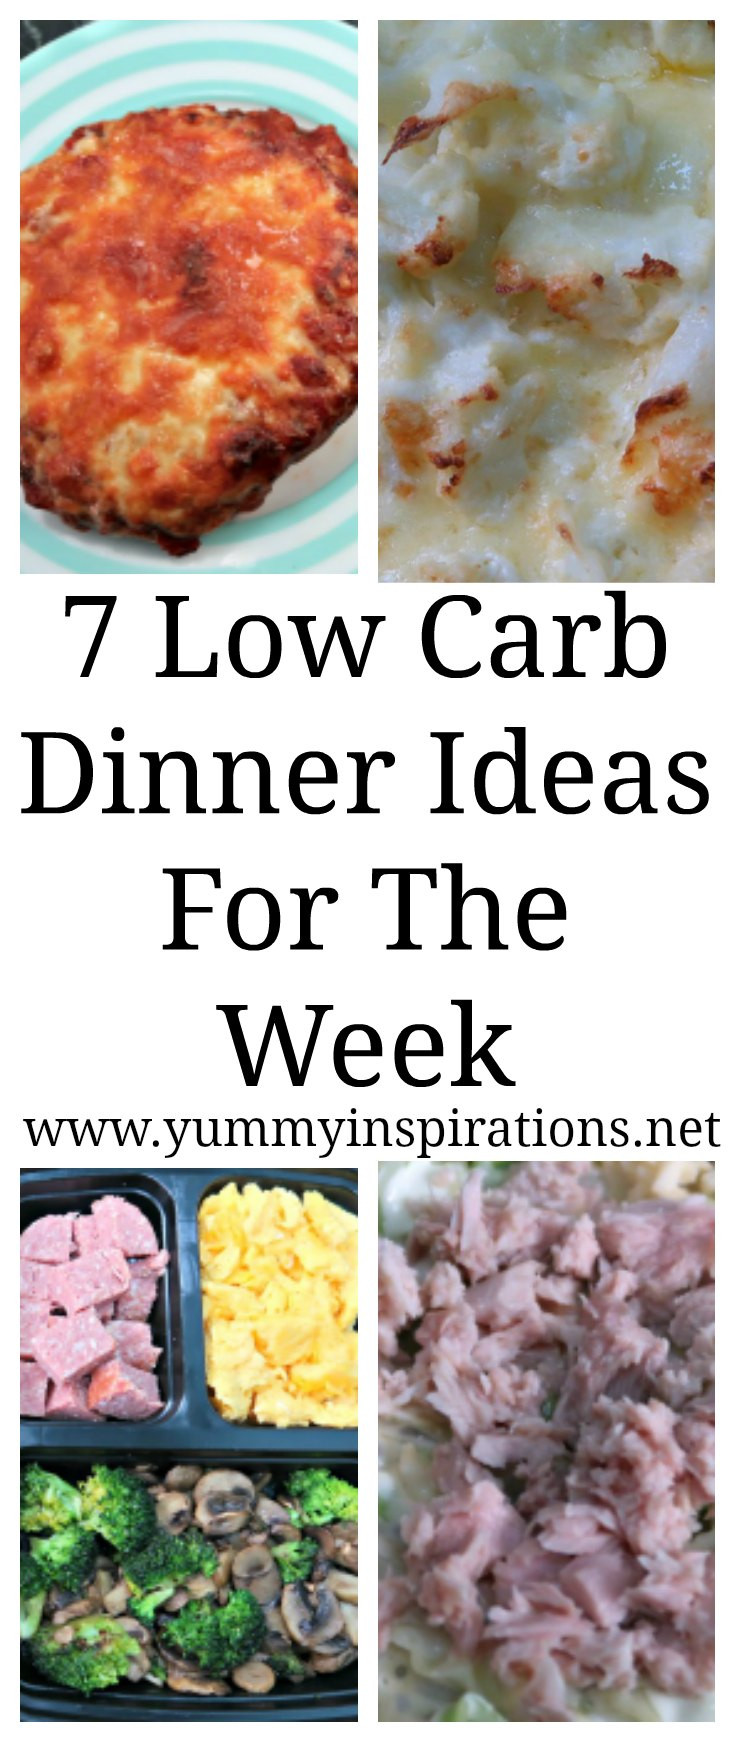 Quick Low Carb Dinners
 7 Low Carb Dinner Ideas Easy Keto Dinner Meal Recipes